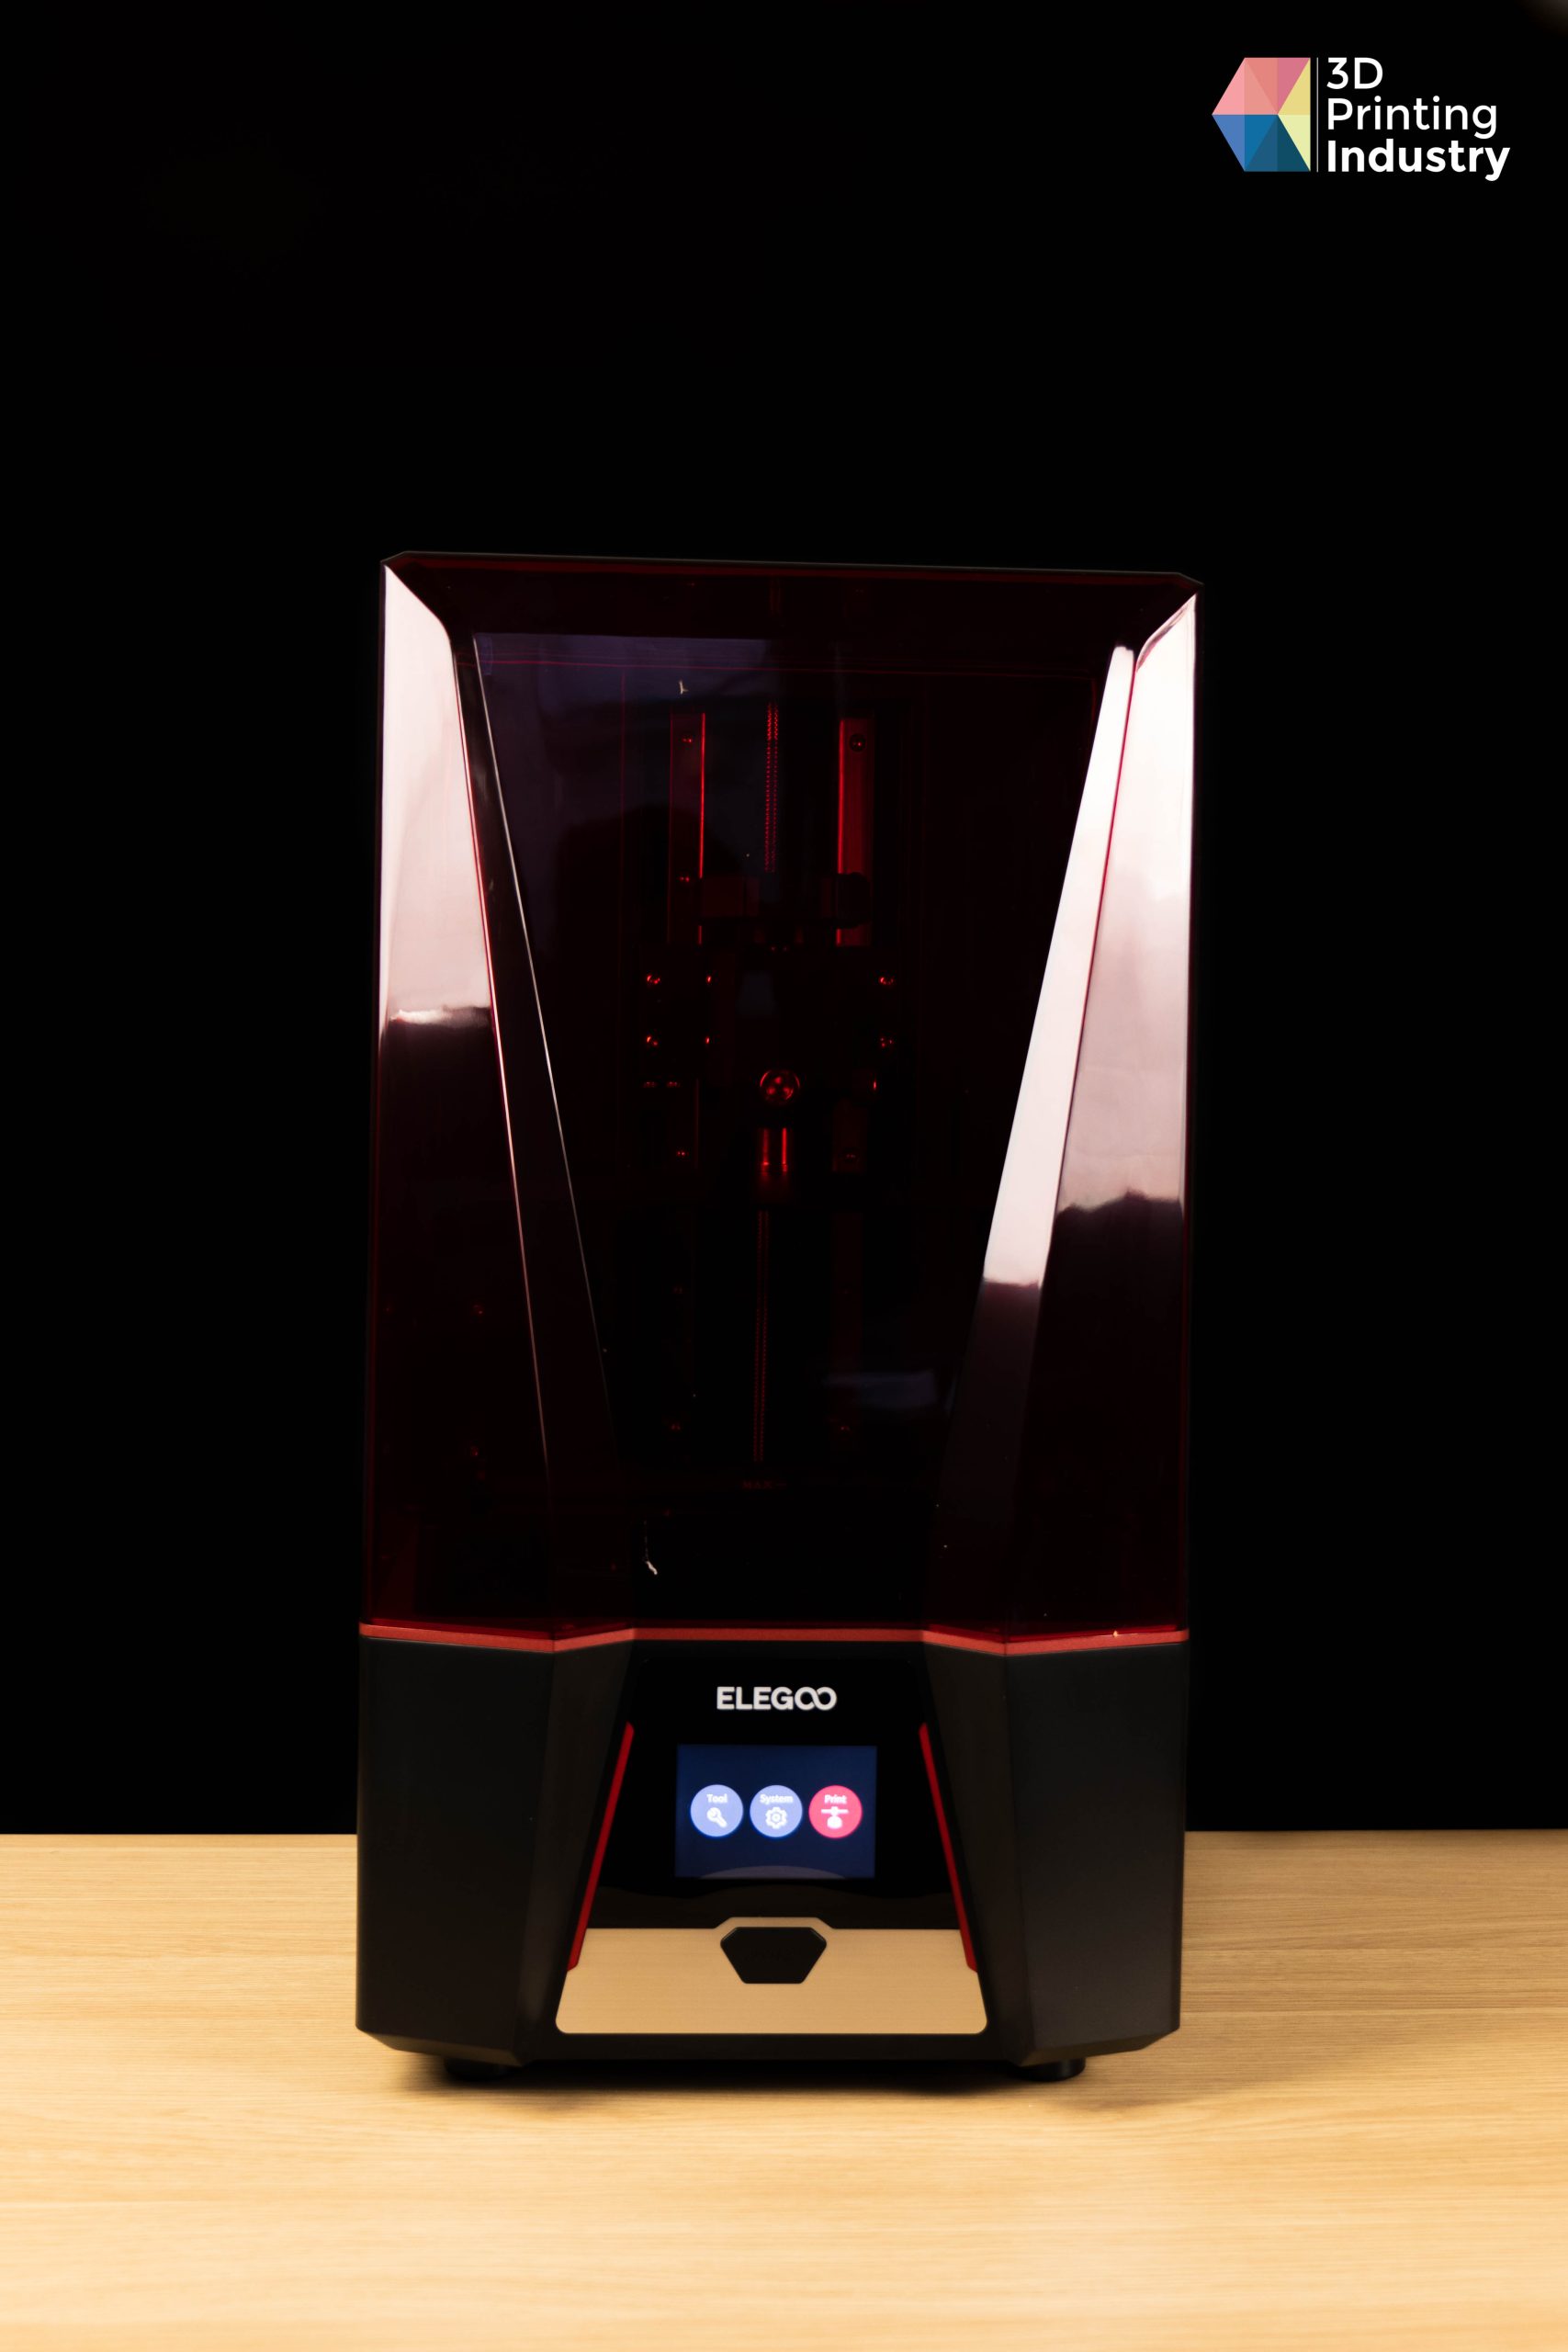 REVIEW The Elegoo Saturn 2, a new 8K resin 3D printer with a Mono LCD